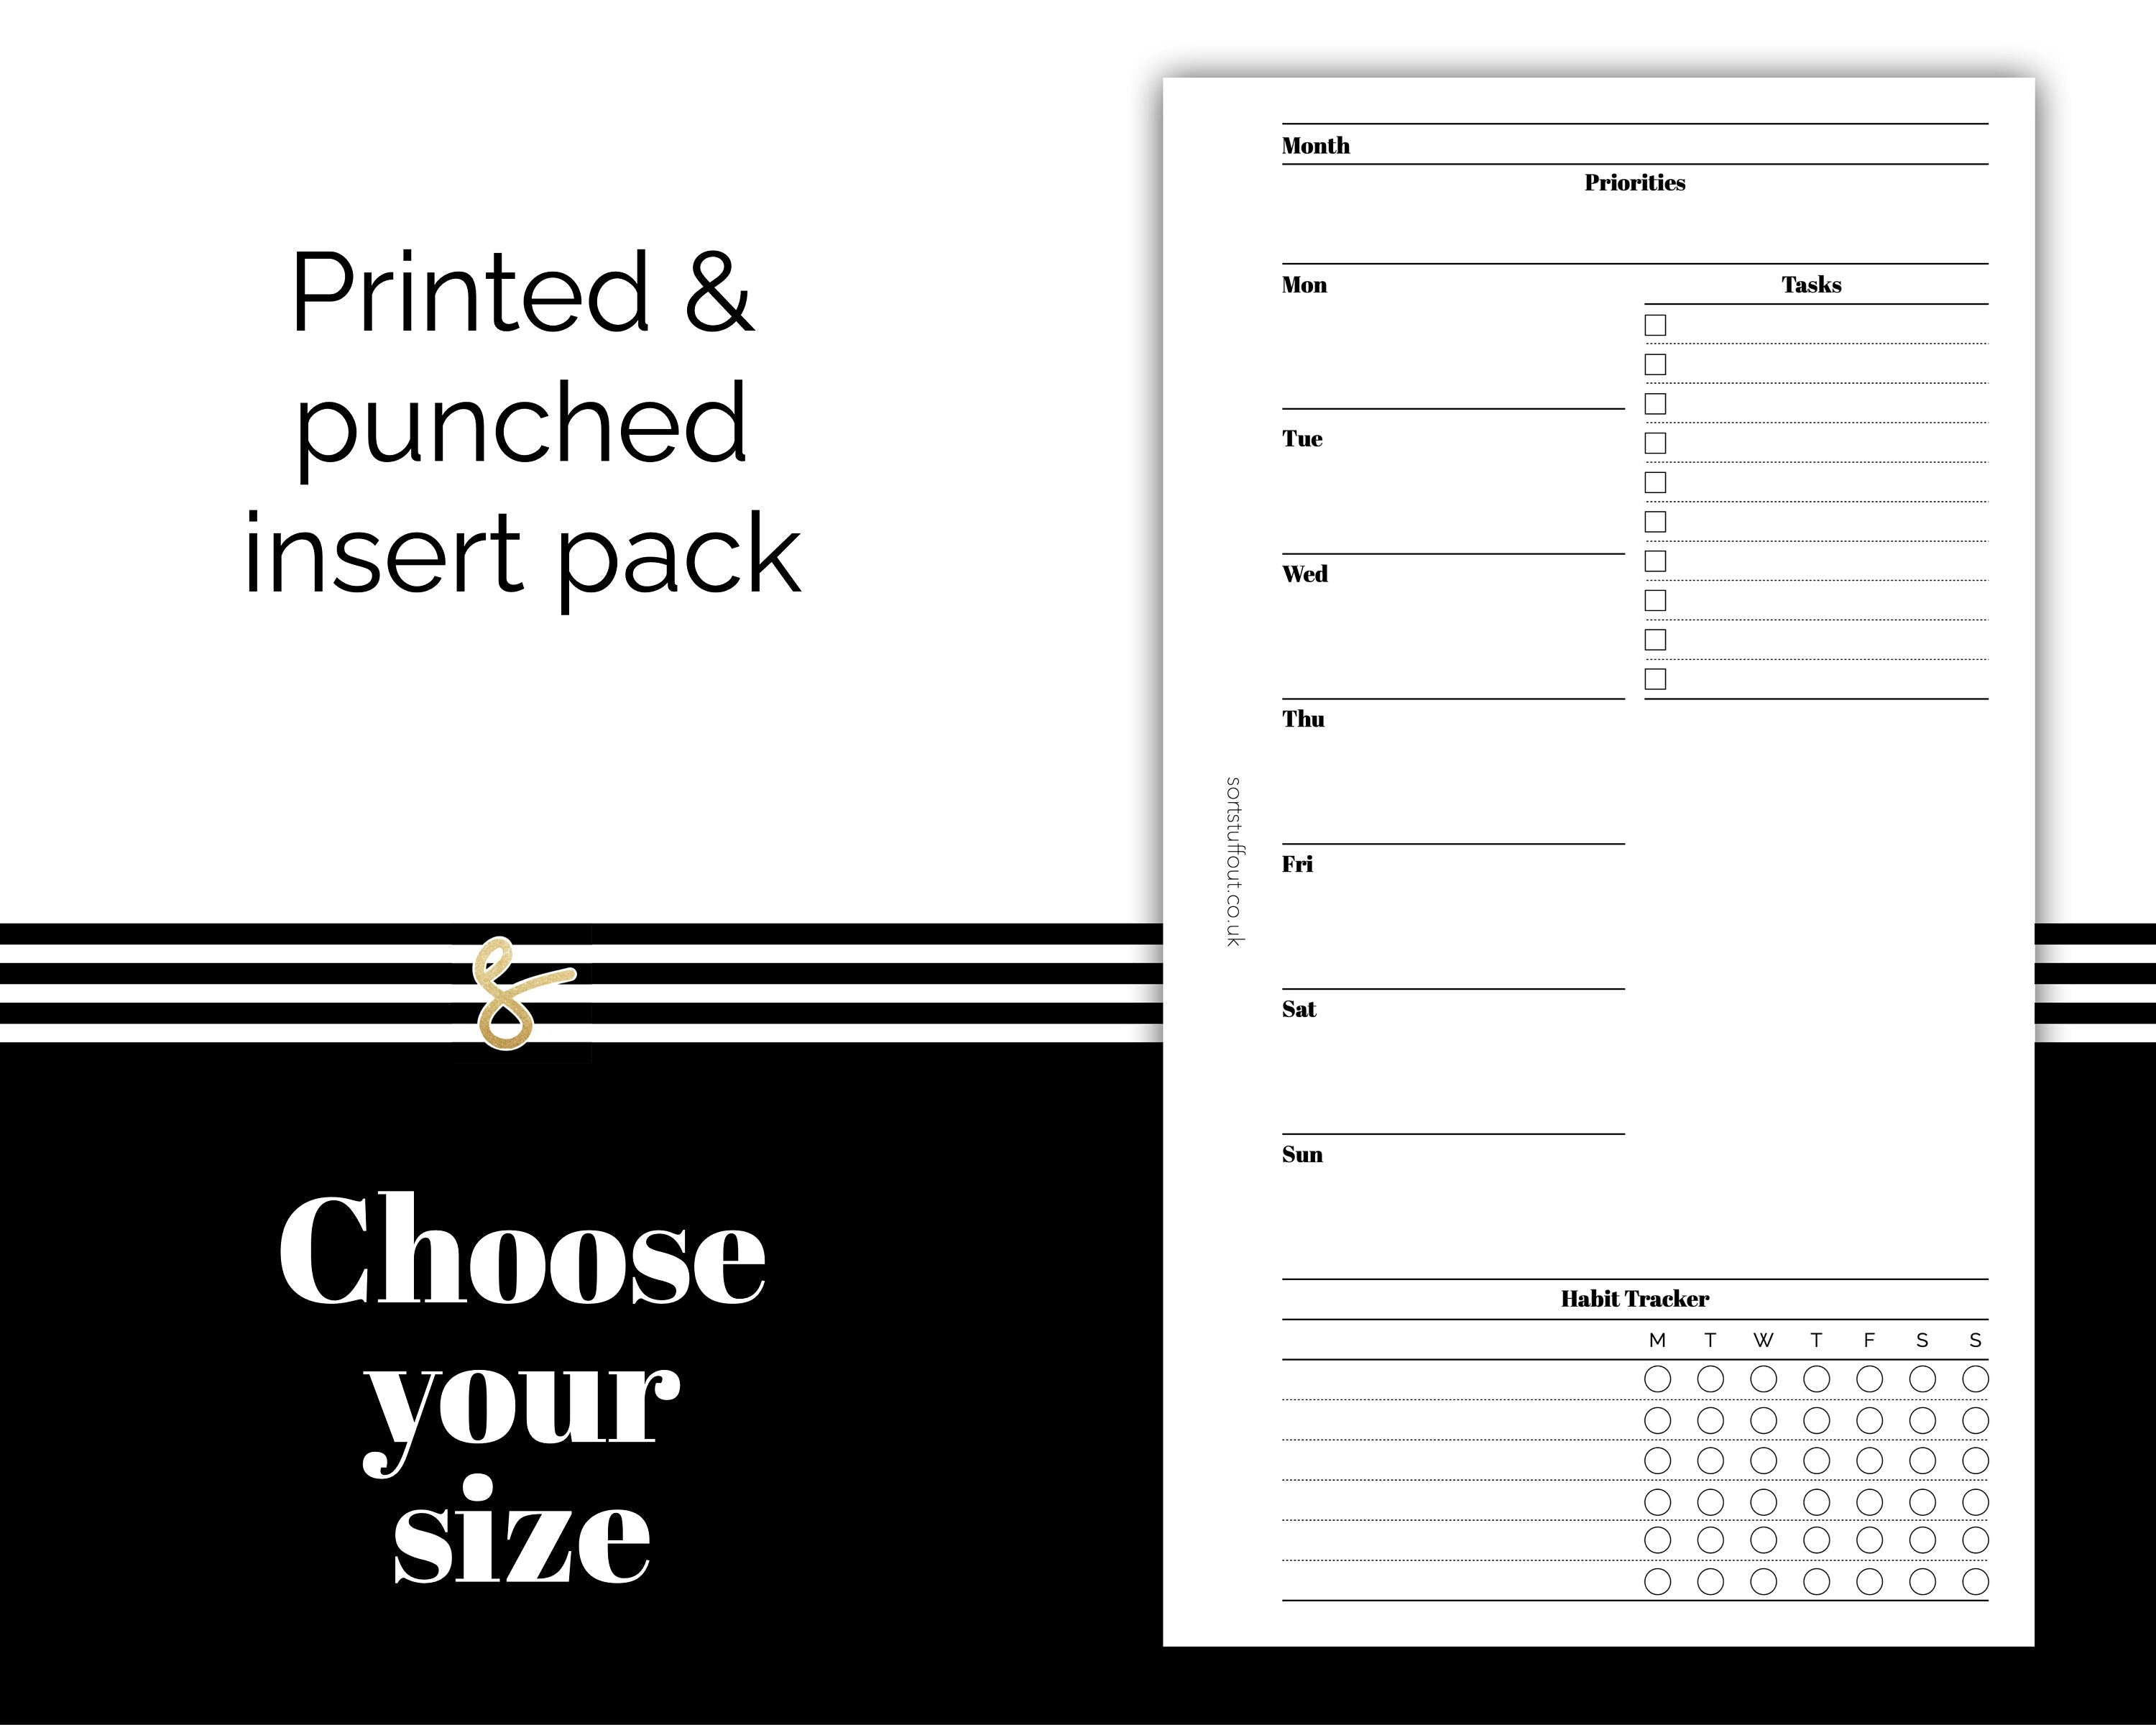 Week on One Page with Notes, Tasks and Habits - Printed Planner Inserts